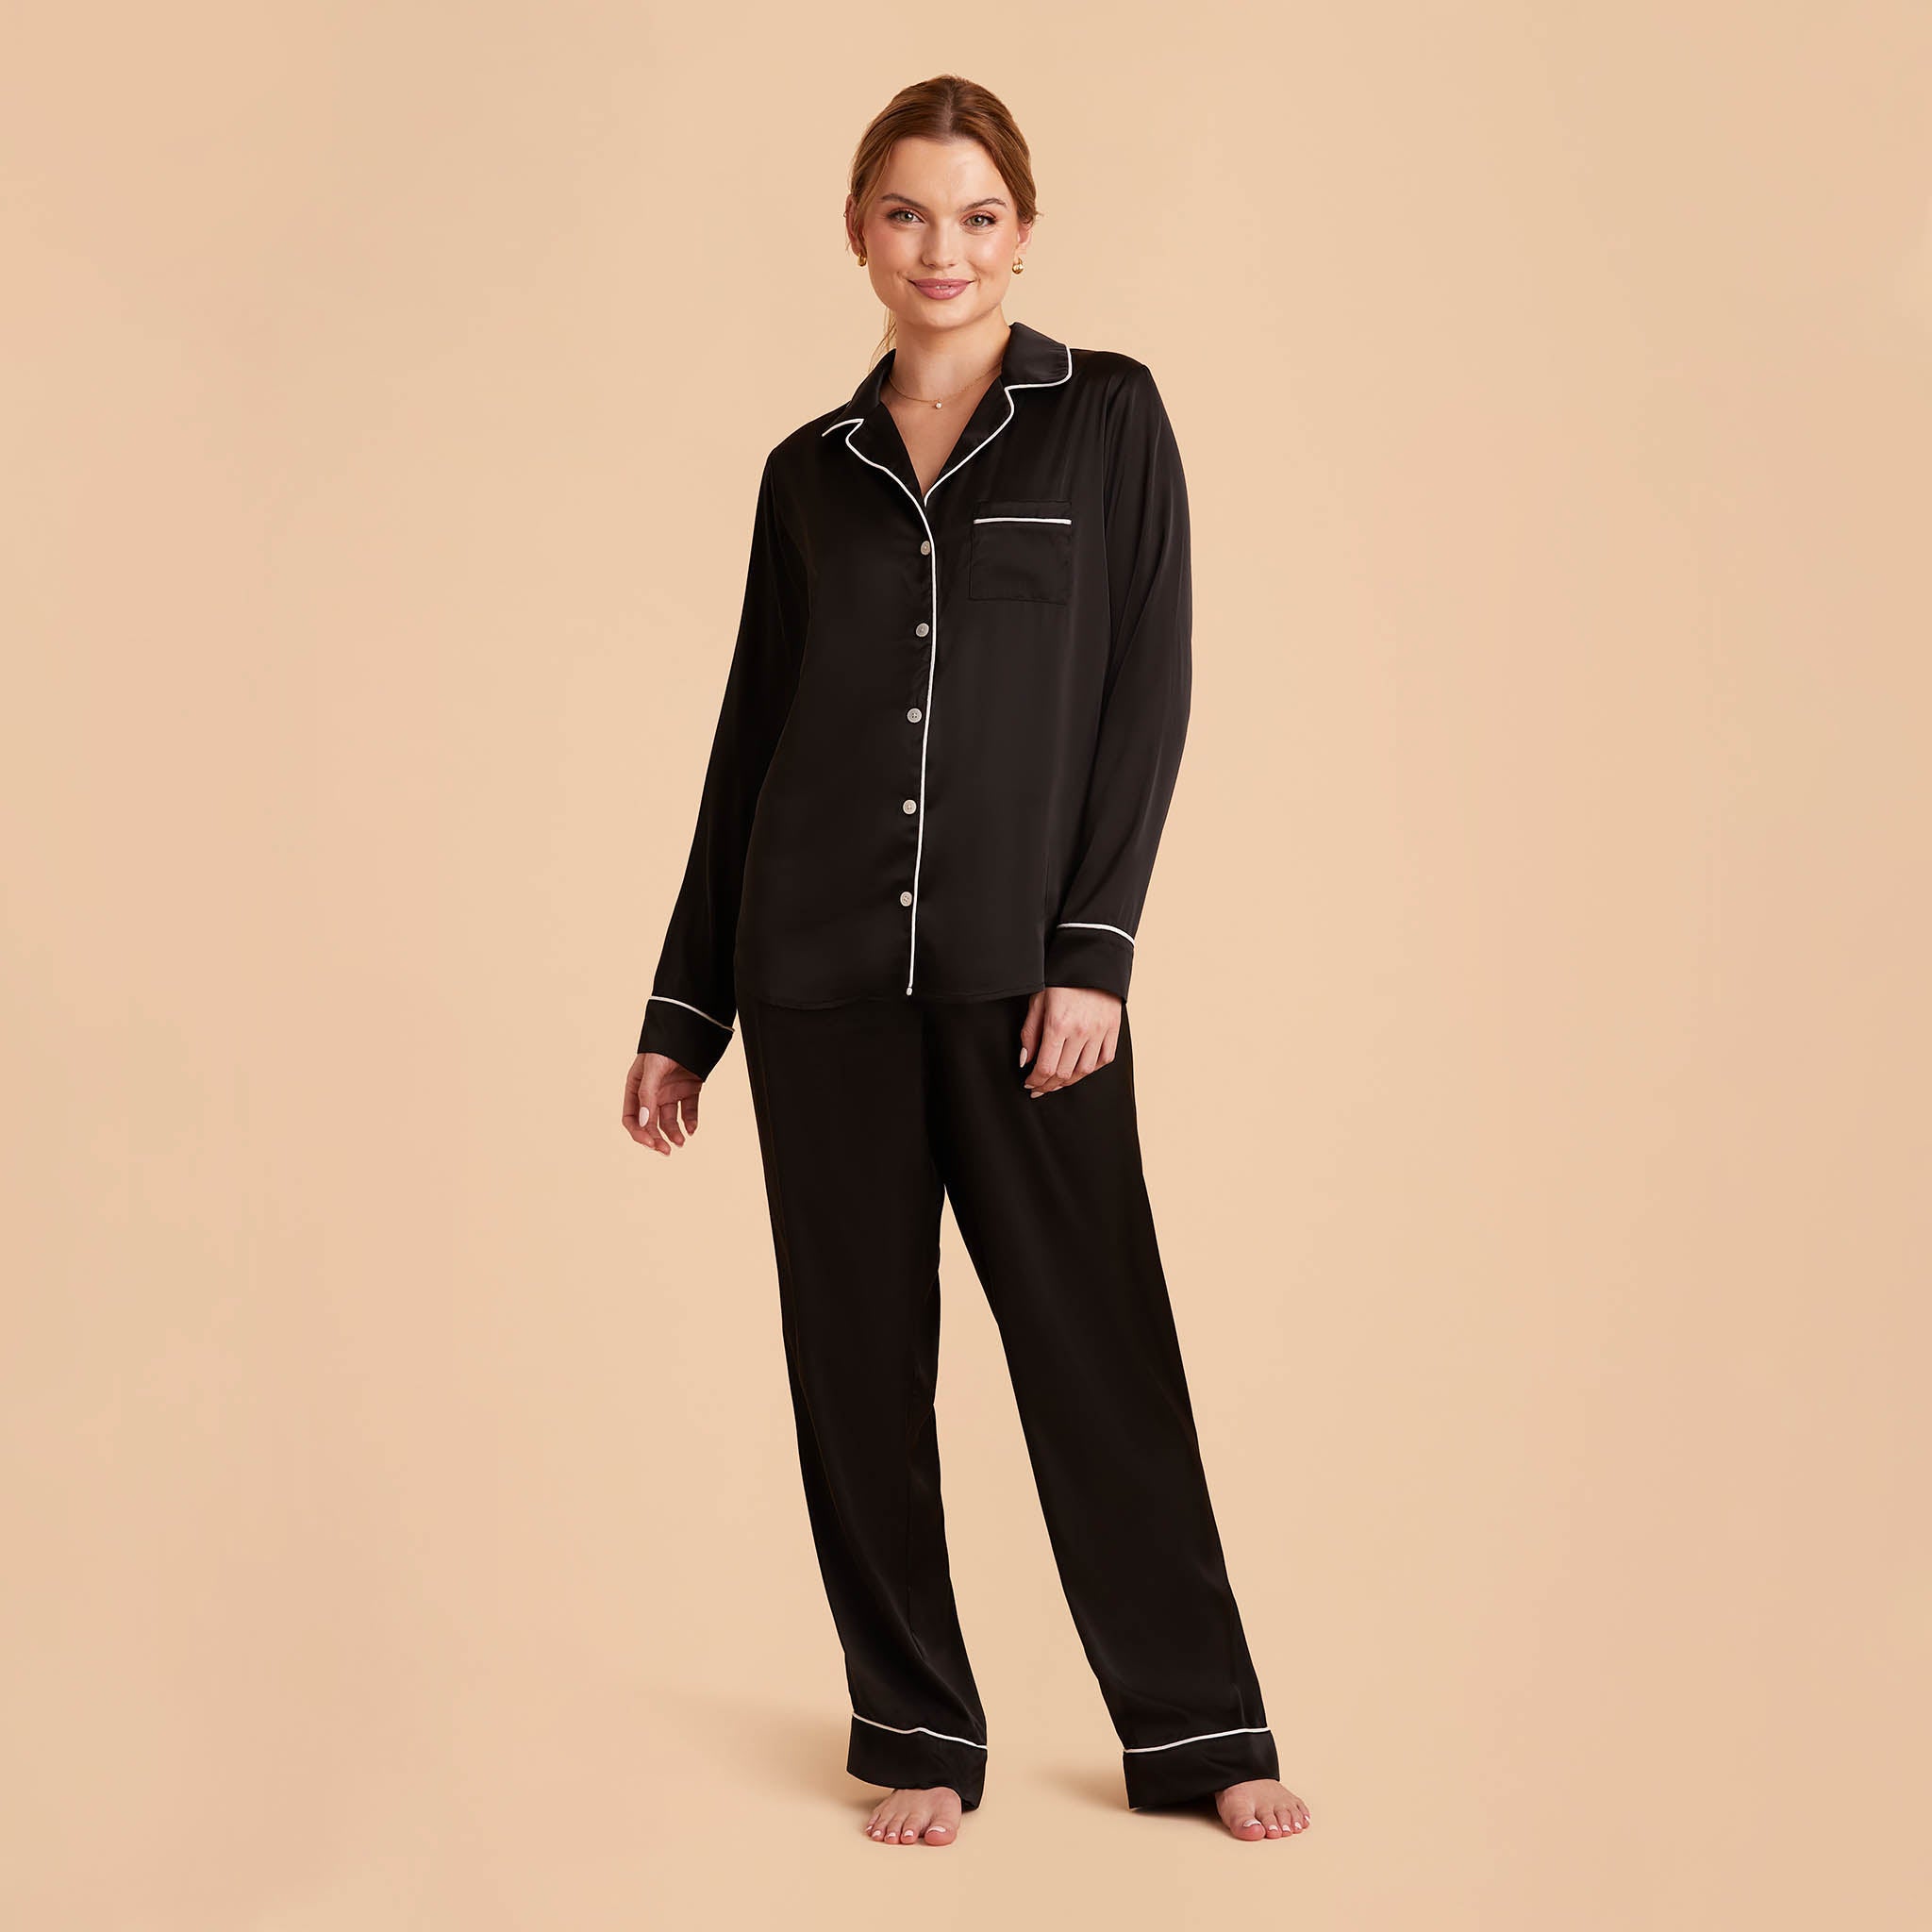 Jonny Satin Long Sleeve Pajama Top With White Piping in black, front view